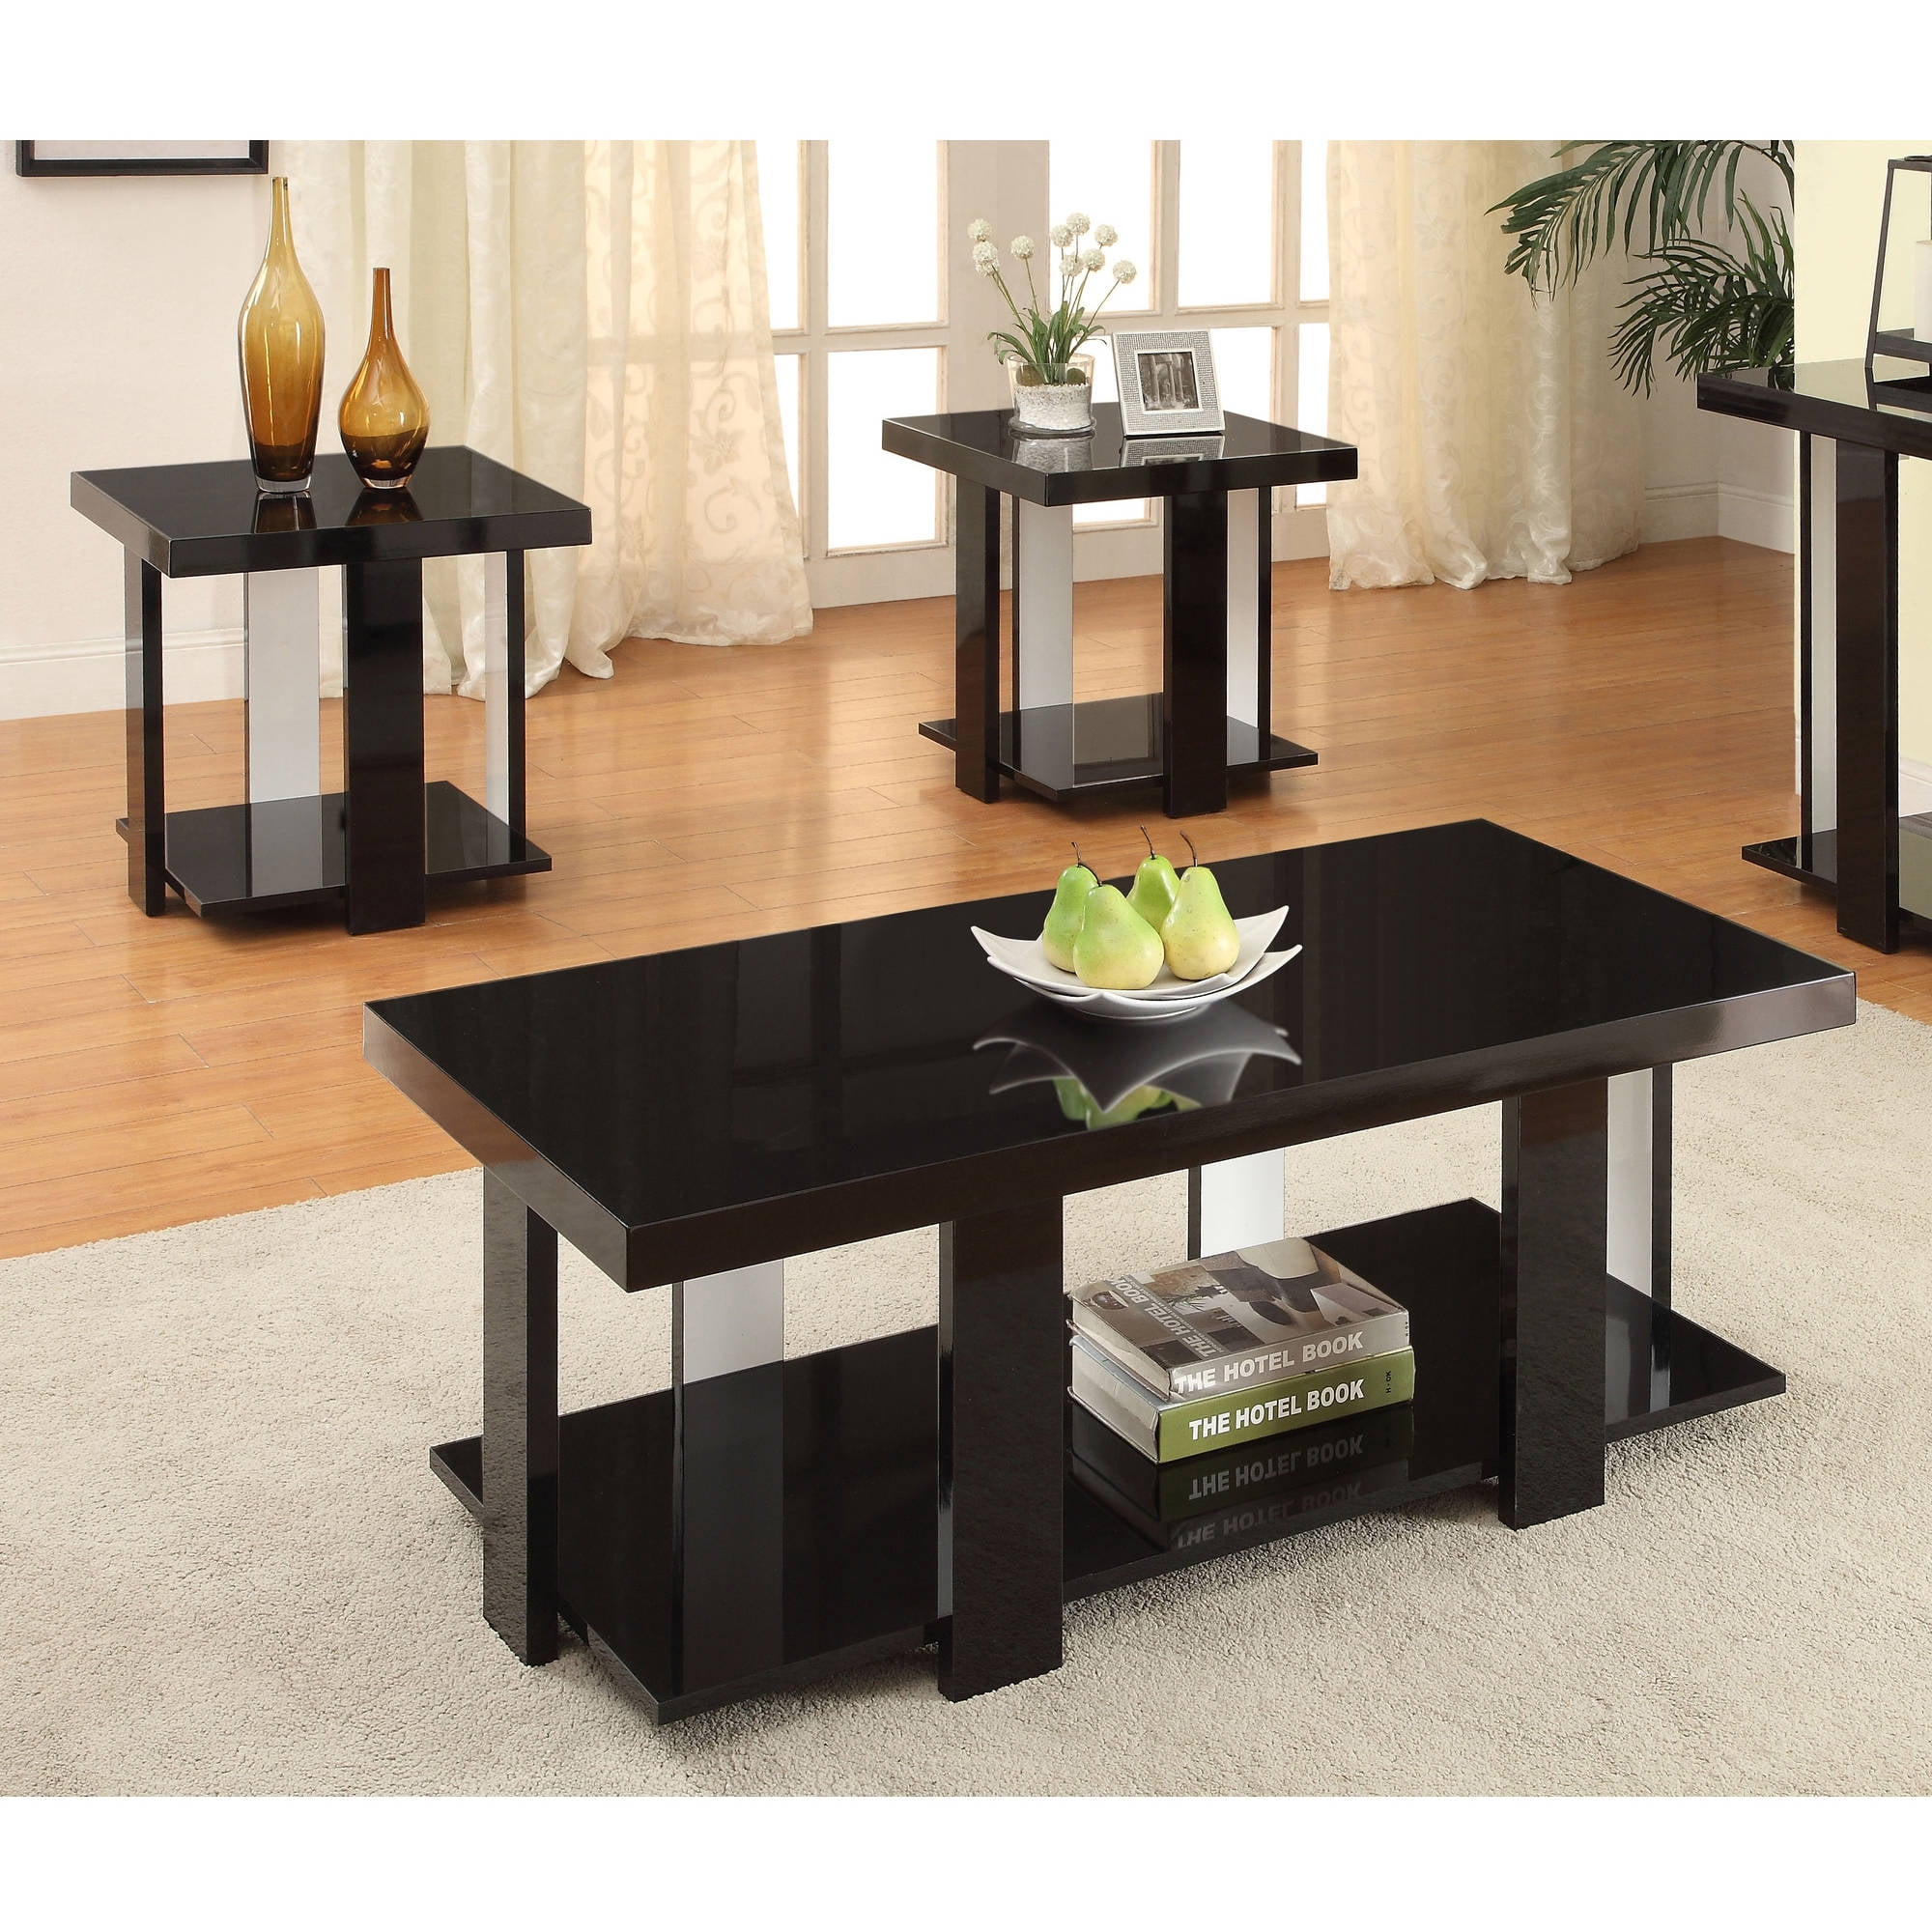 Rankin Contemporary 3-Piece Coffee and End Table Set ...